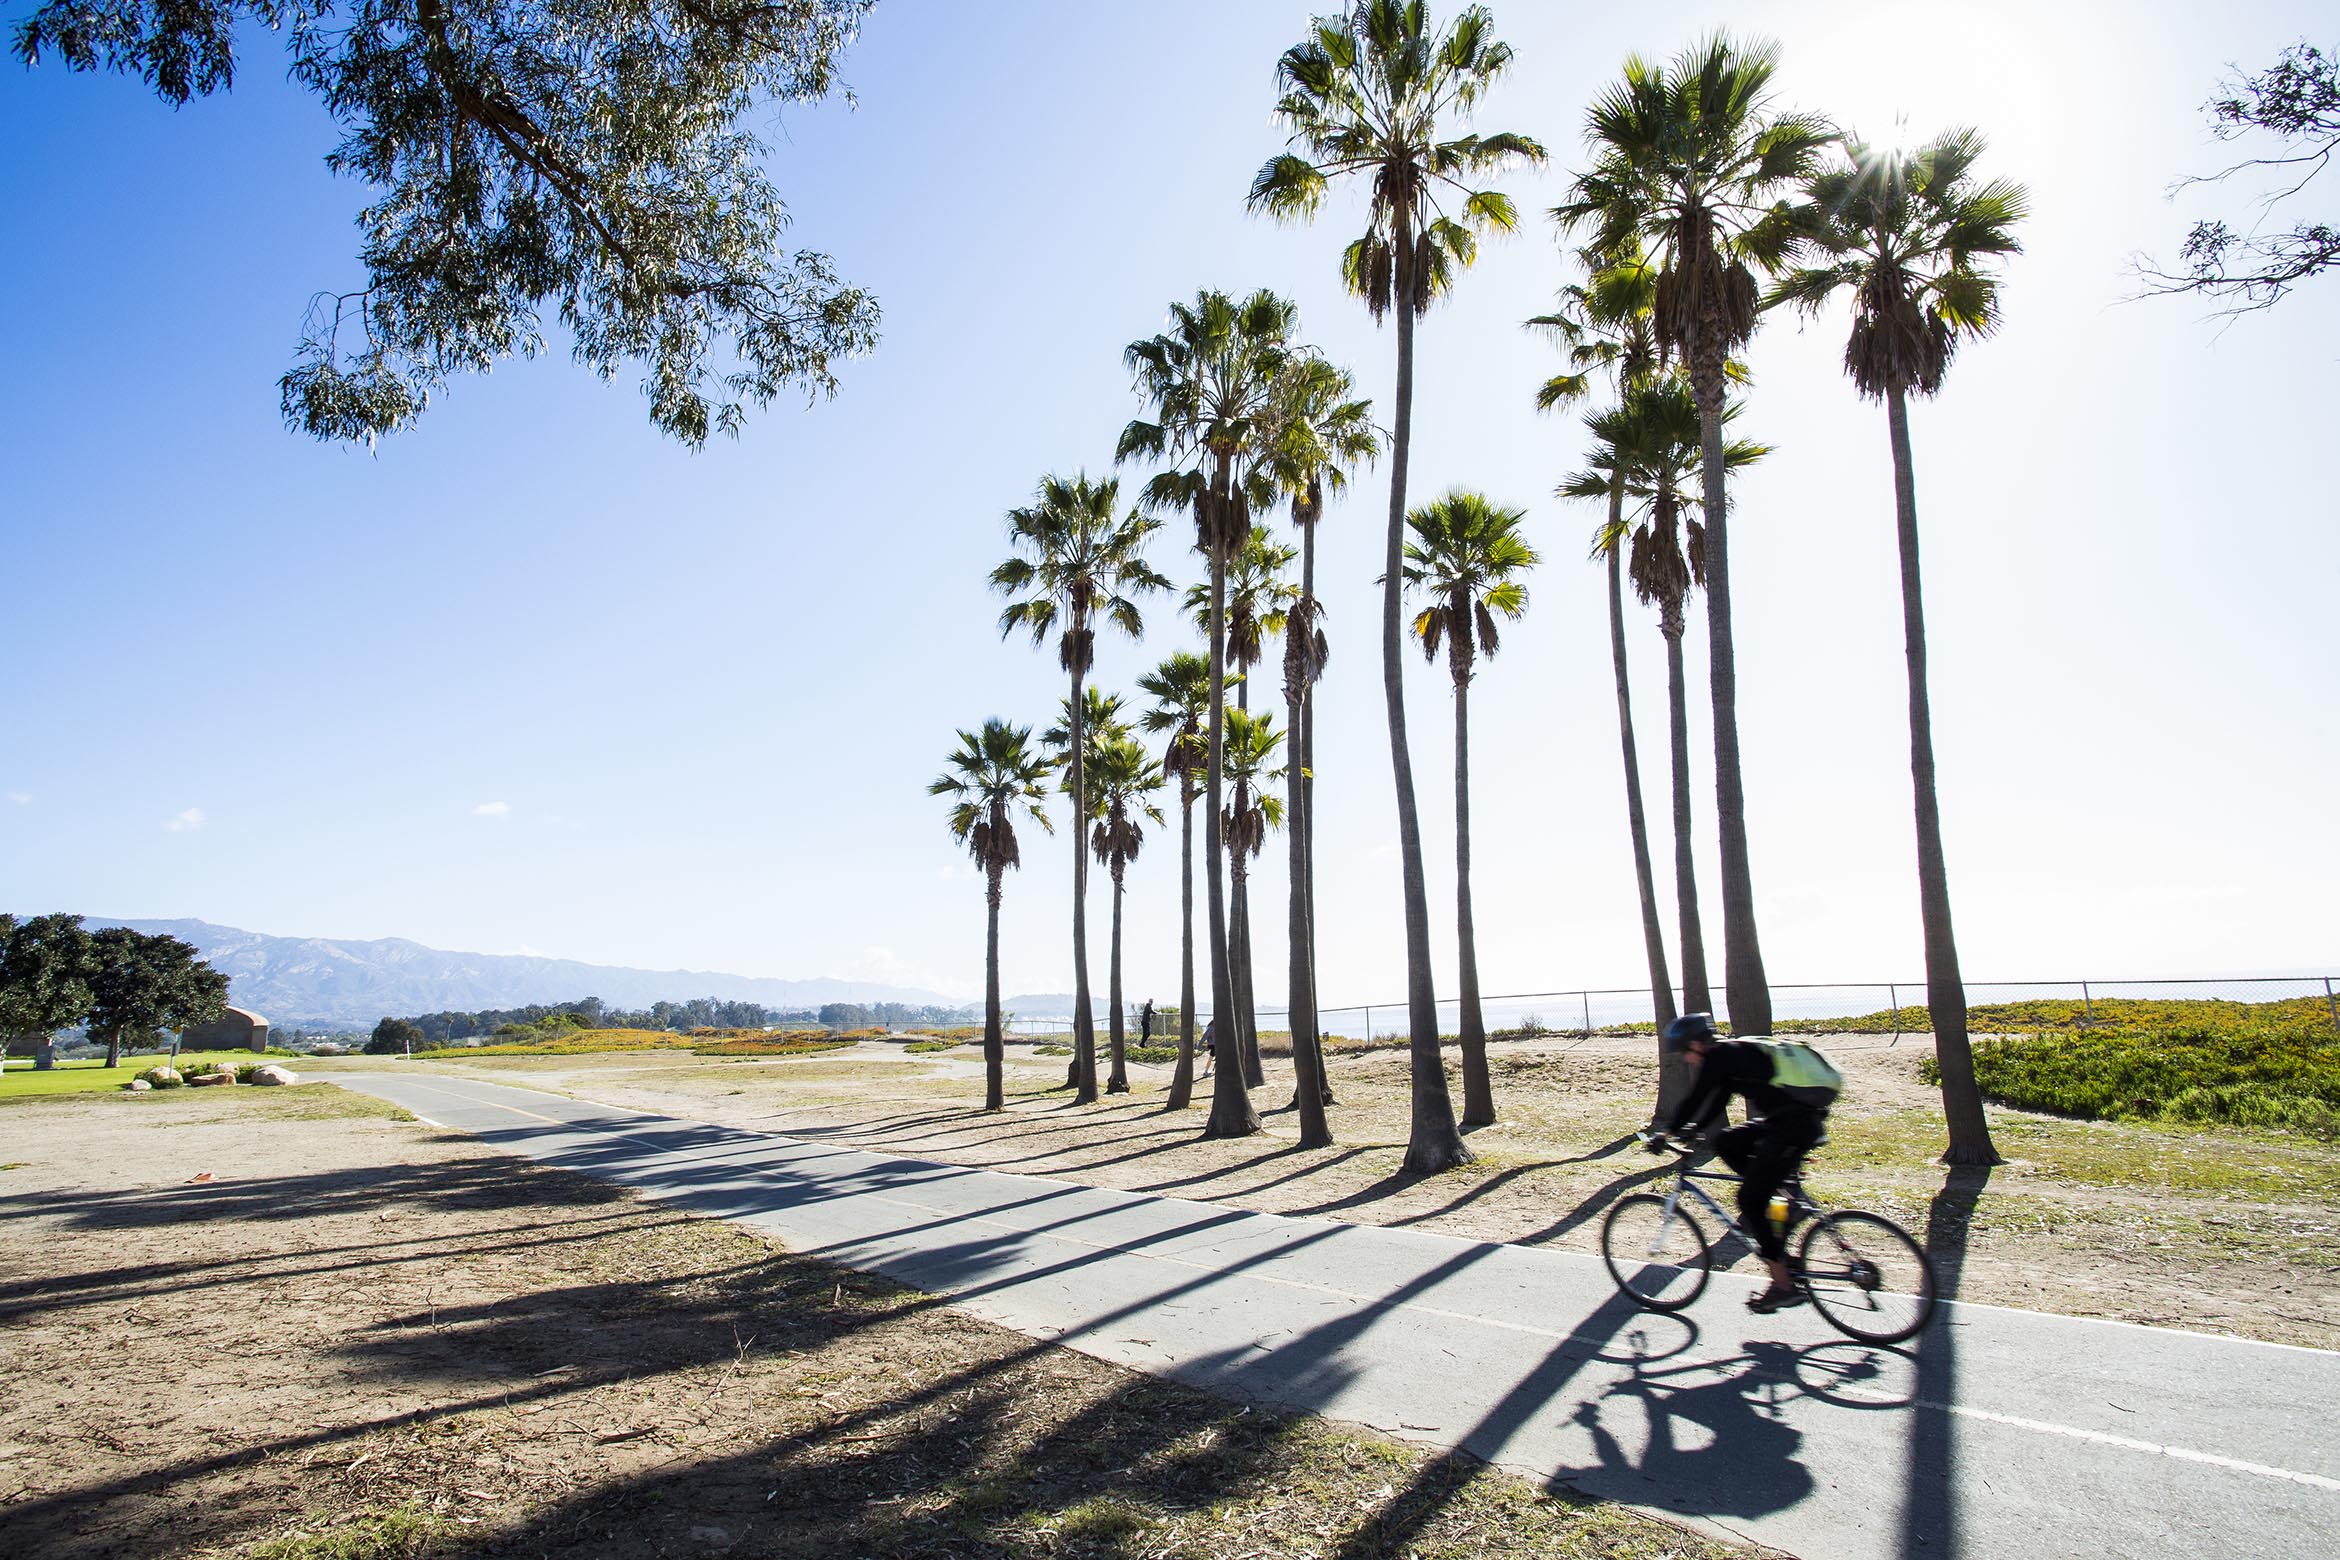 This is an image of a student biking past palm trees.